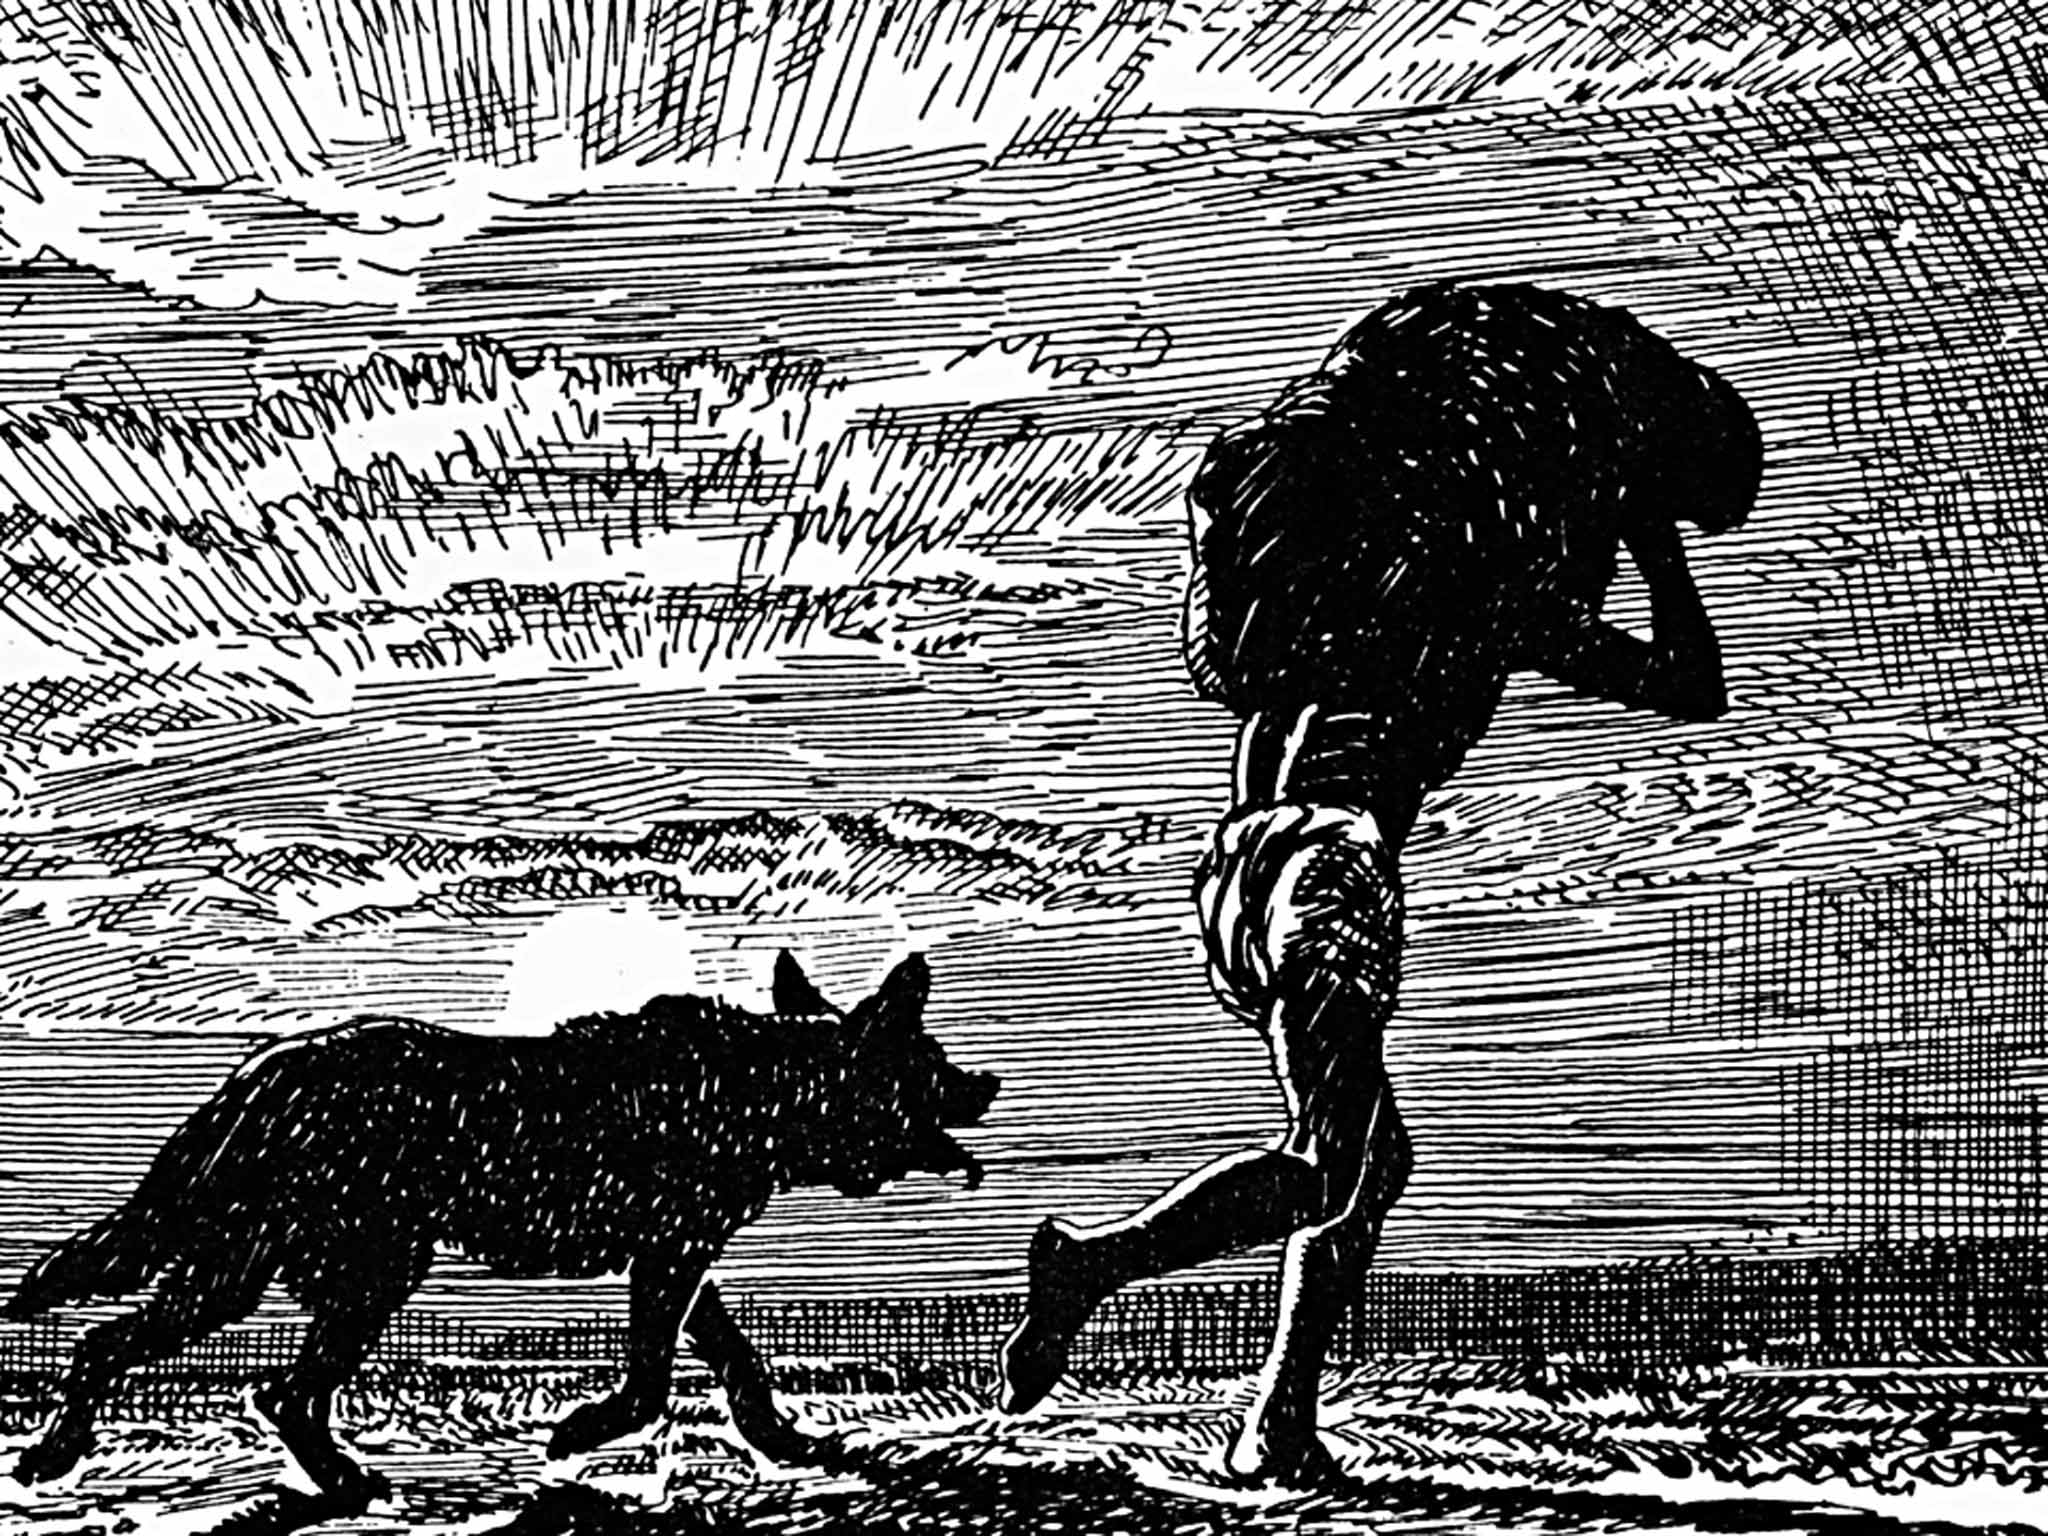 Critics say Kipling showed loathing for India's primitive villagers in The Jungle Book